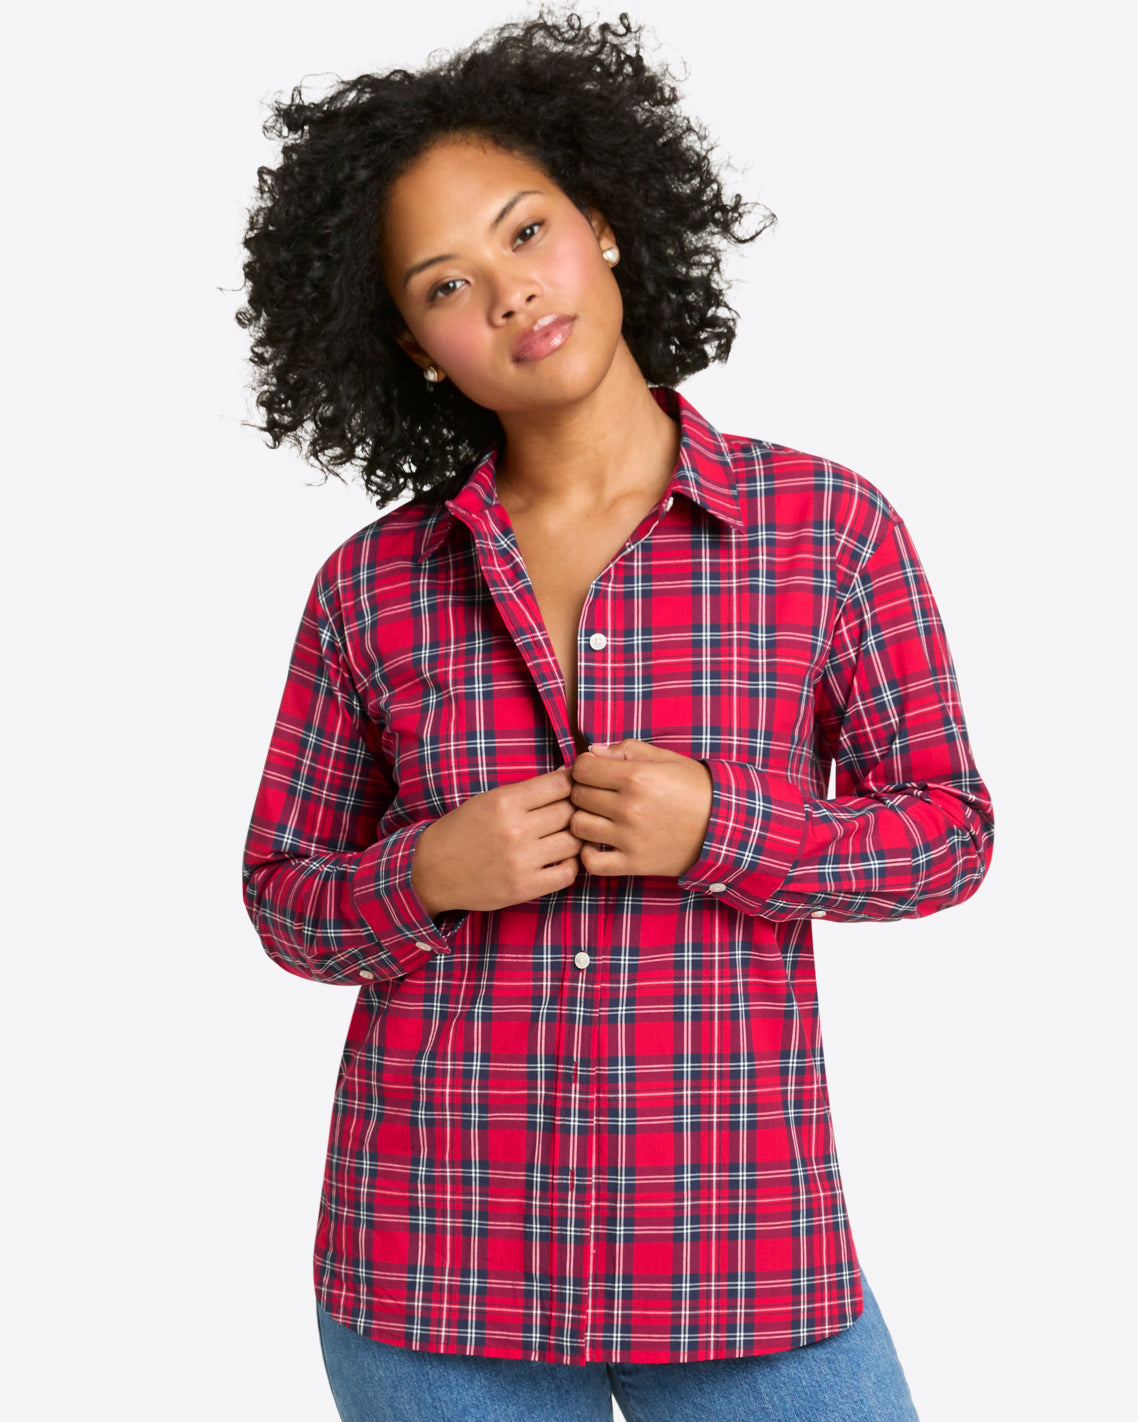 Tanner Buttondown Top in Angie Plaid